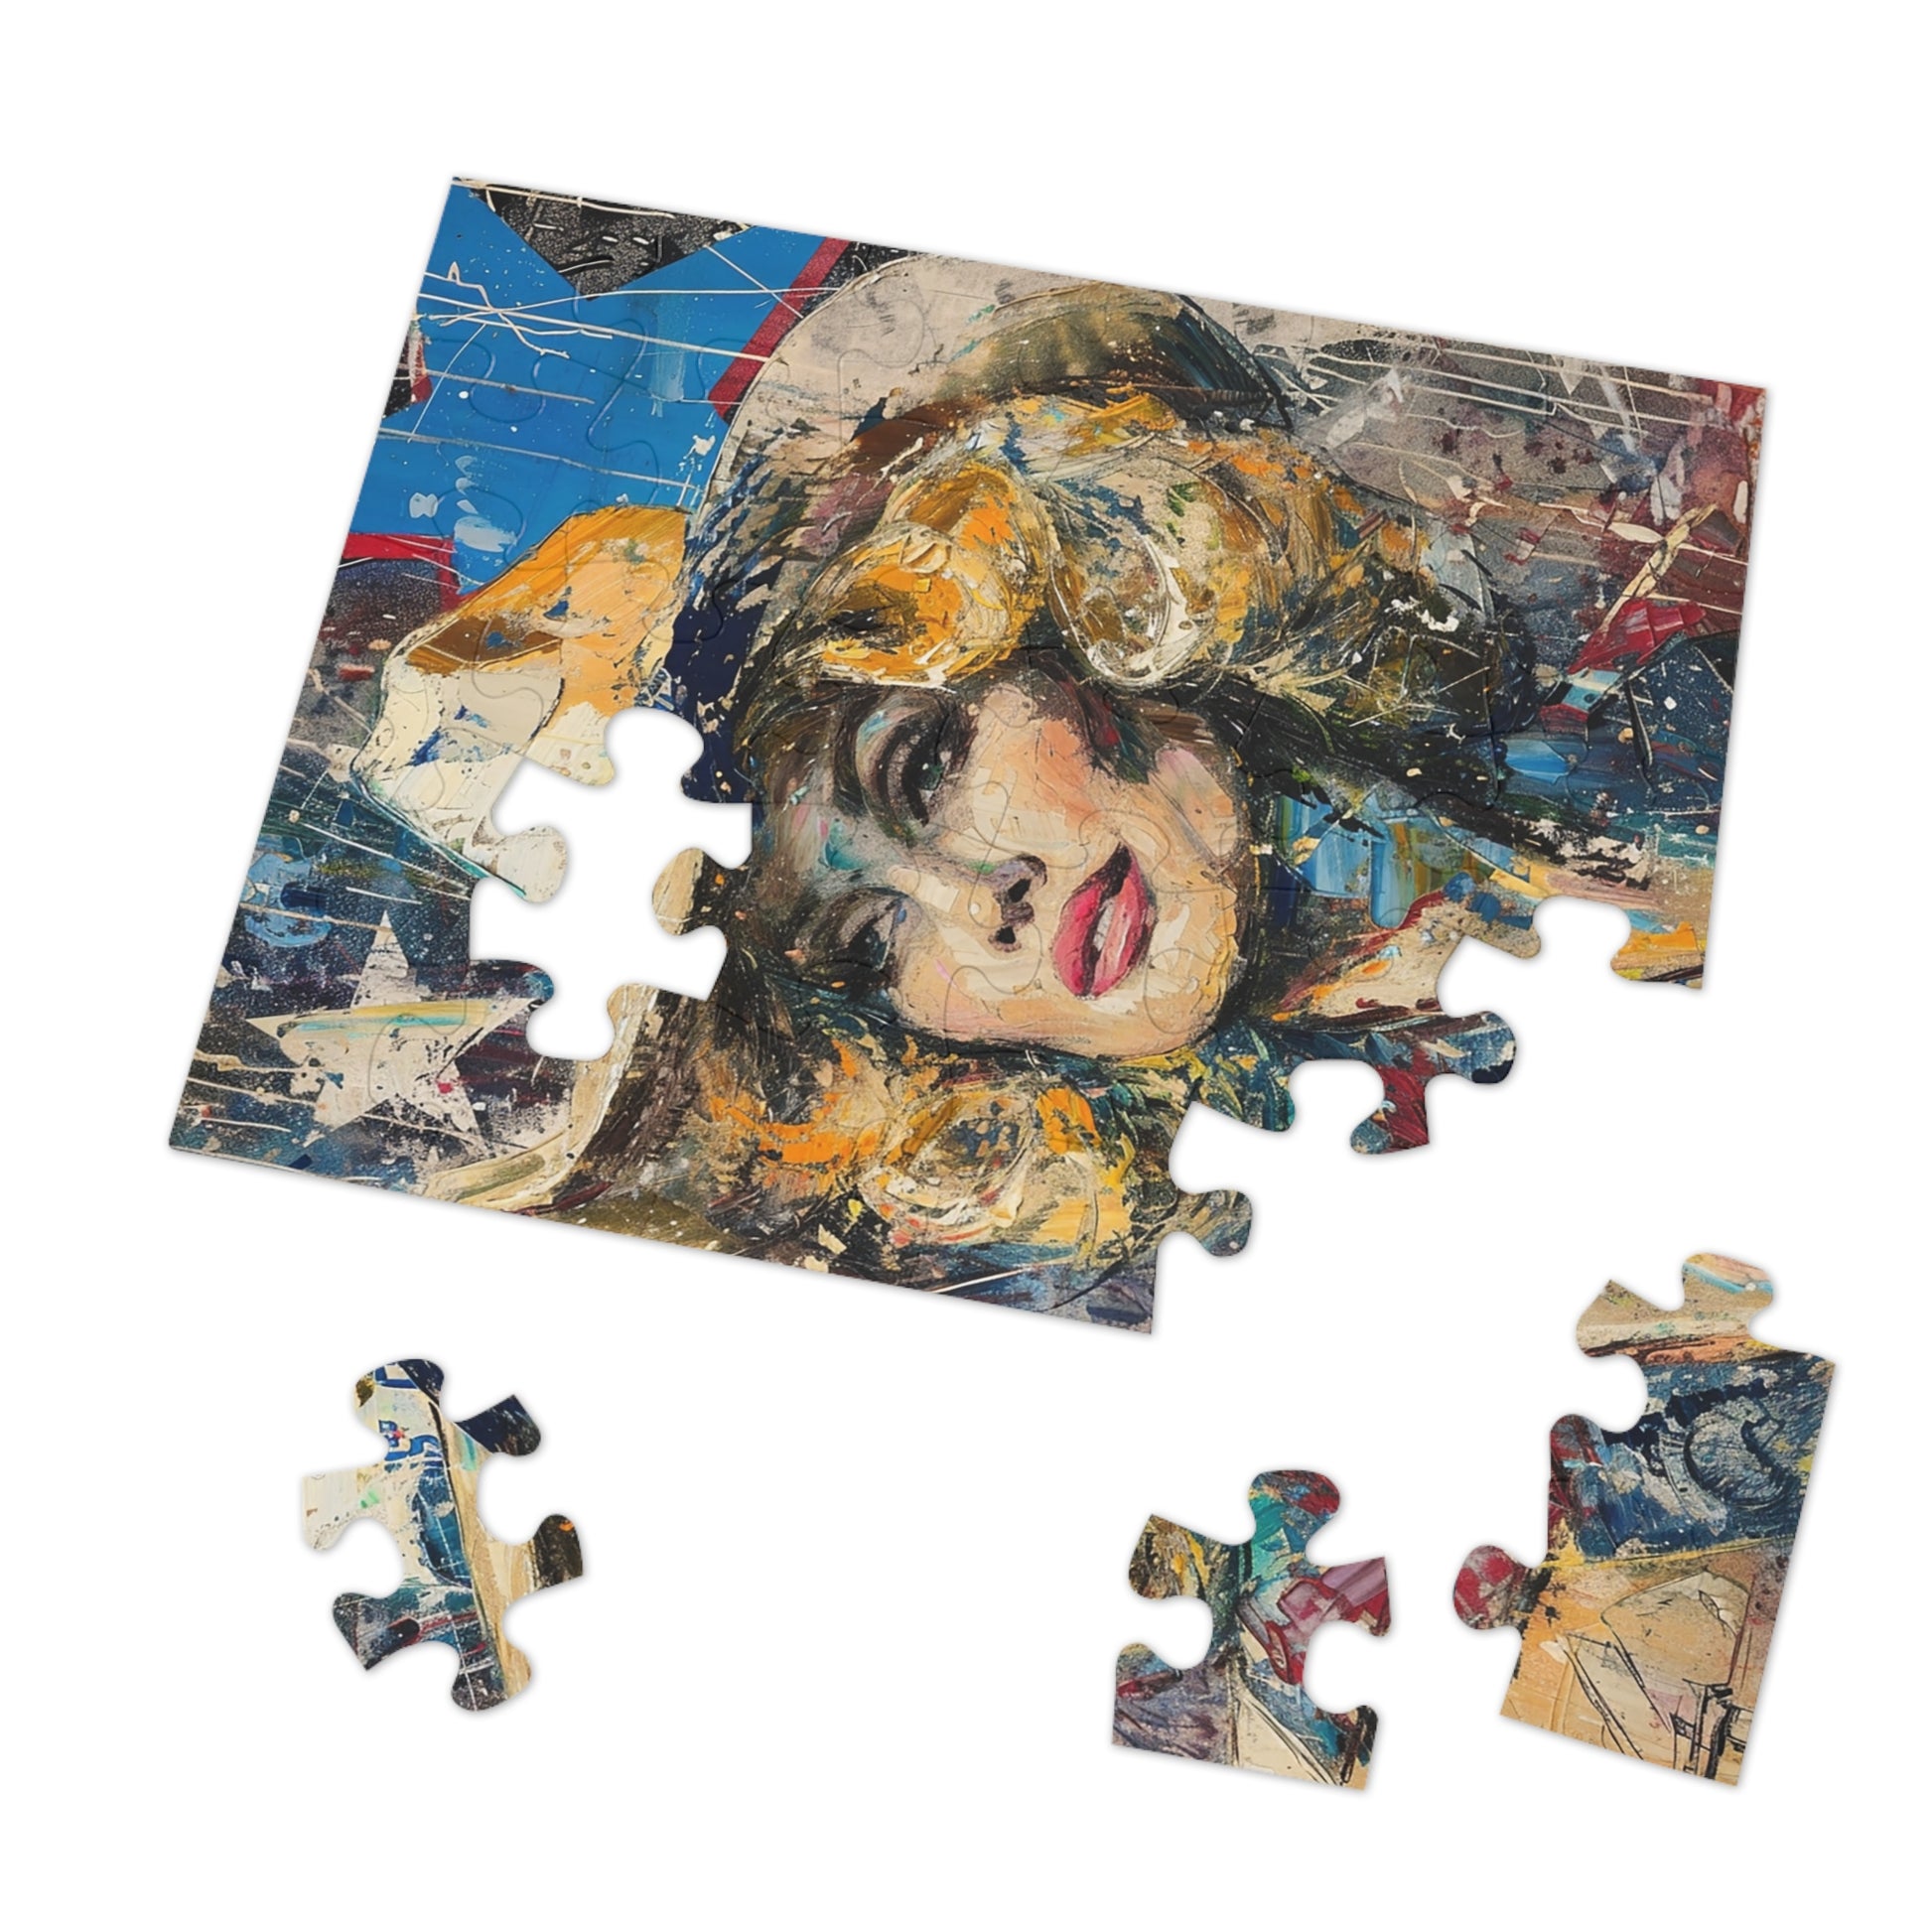 Jigsaw Puzzle - Country Queen